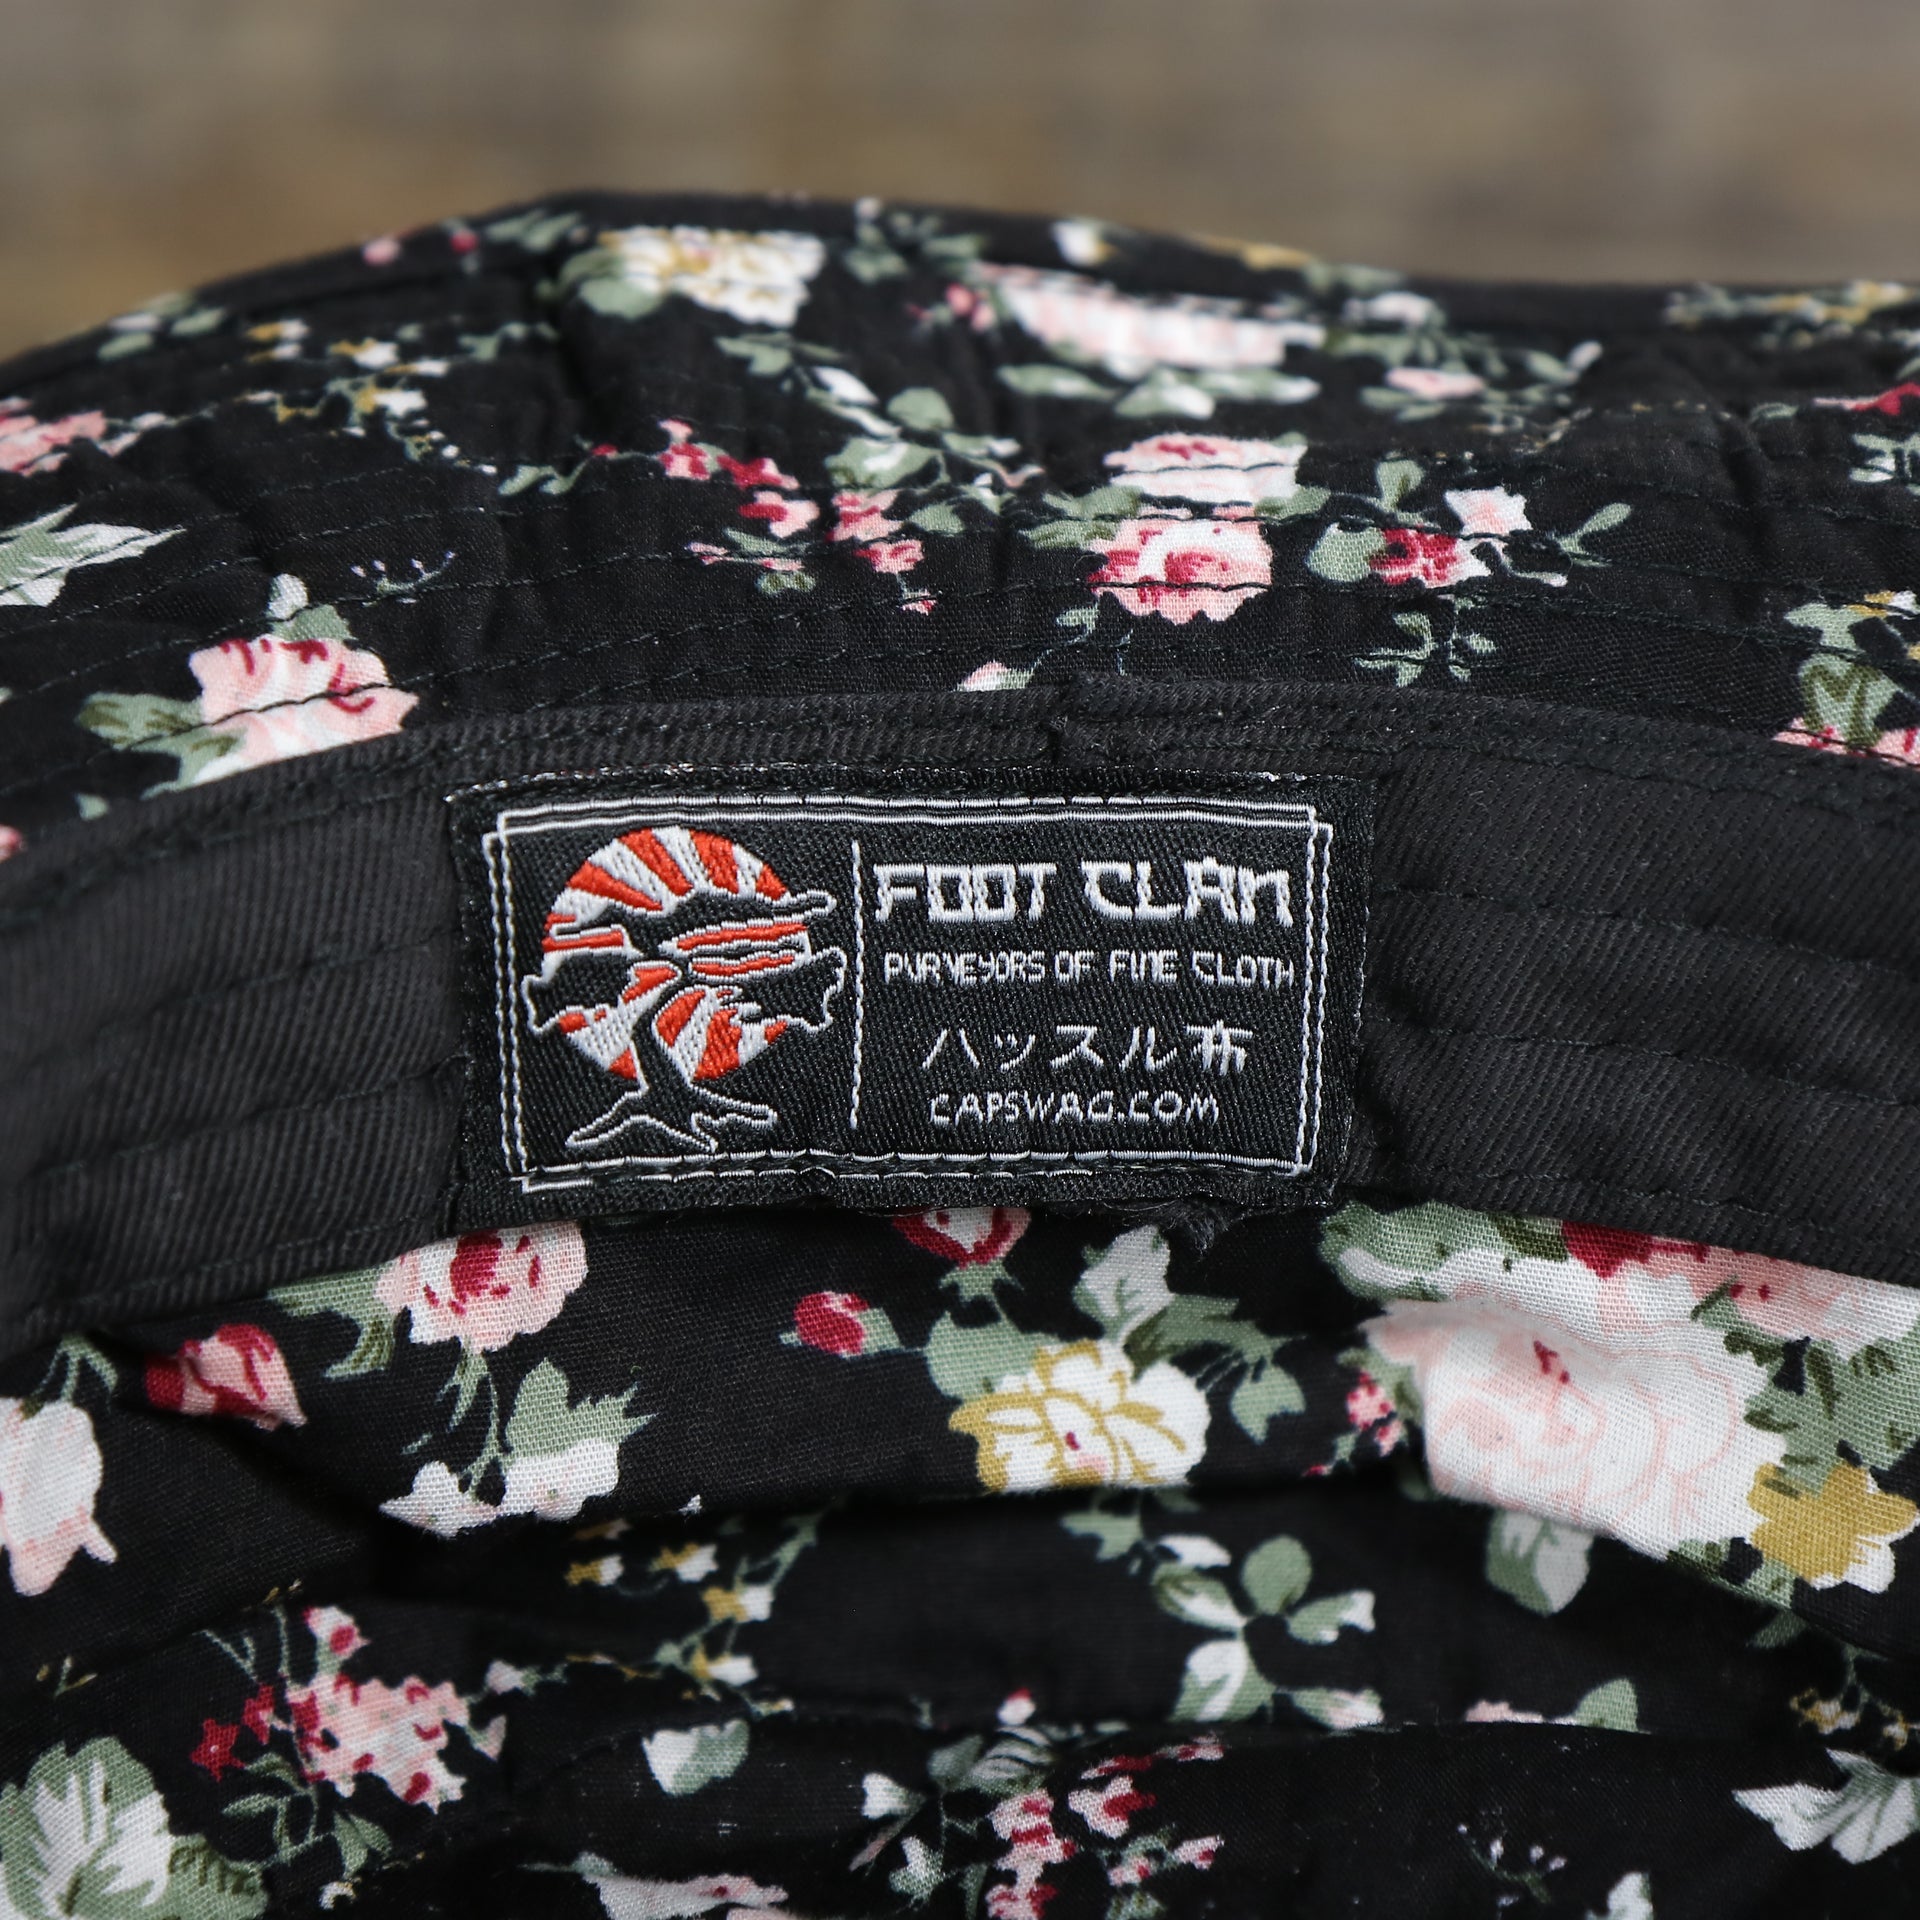 foot clan label on the Foot Clan Blank Black Floral Boonie Bucket Hat